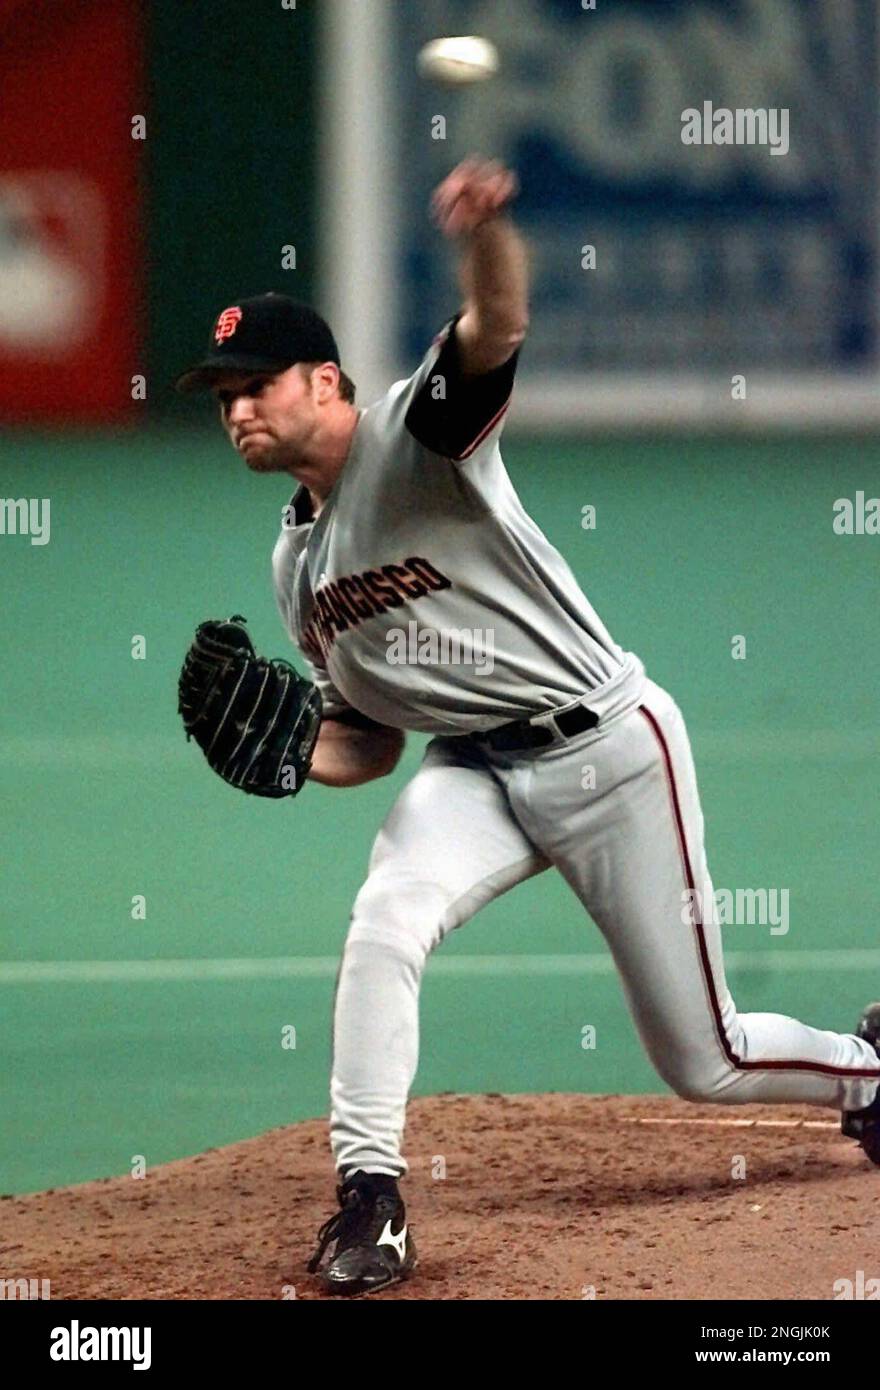 San Francisco Giants pitcher Shawn Estes delivers a pitch in the